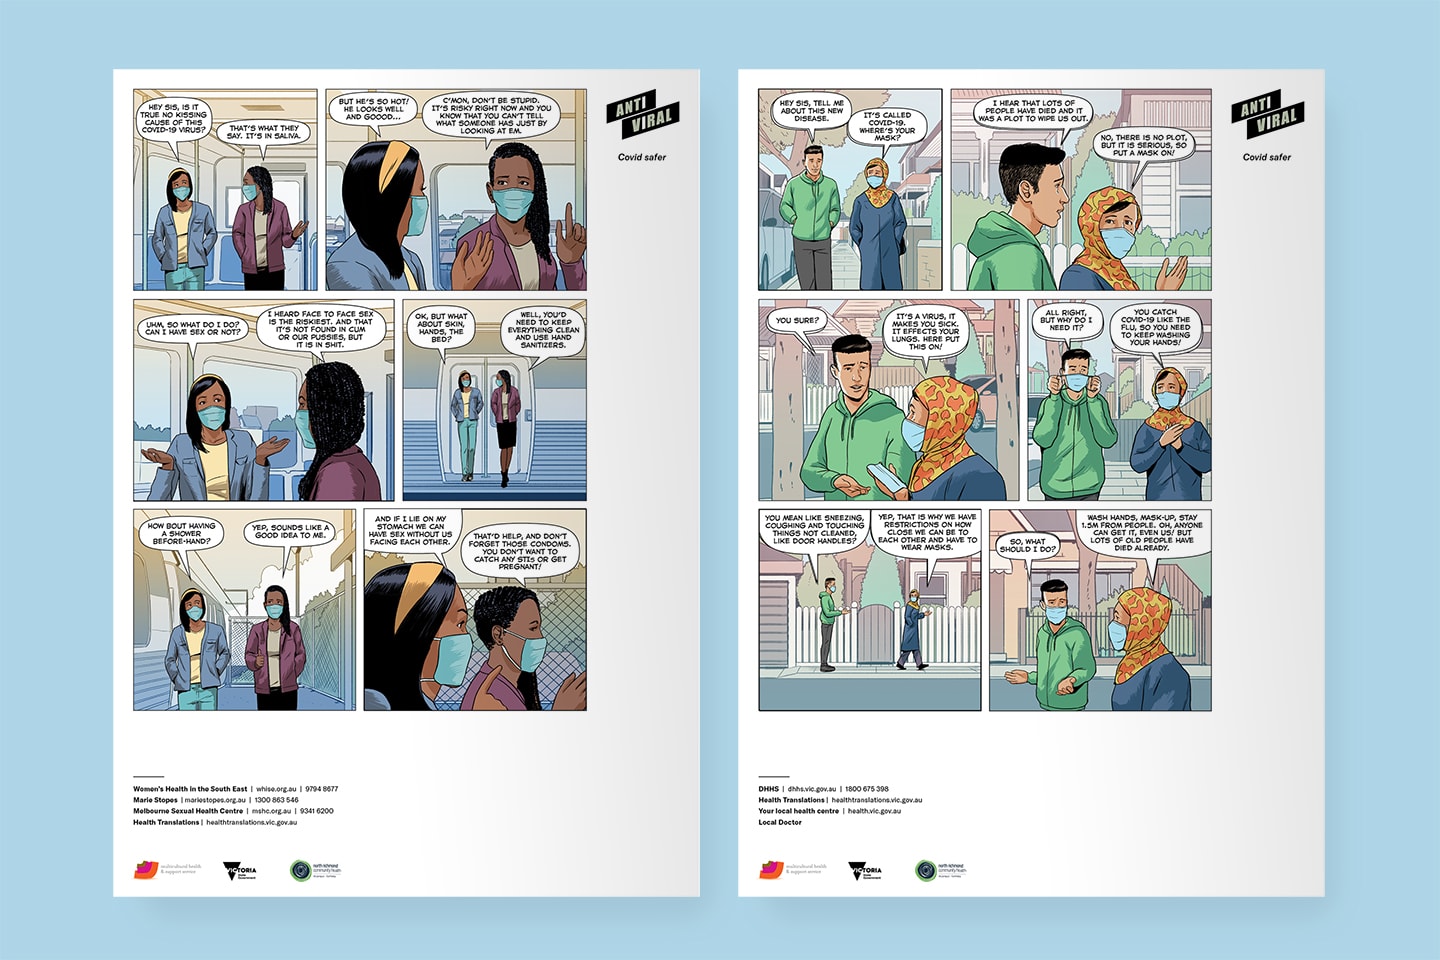 Two of the CEH comics portraying youth issues during COVID-19